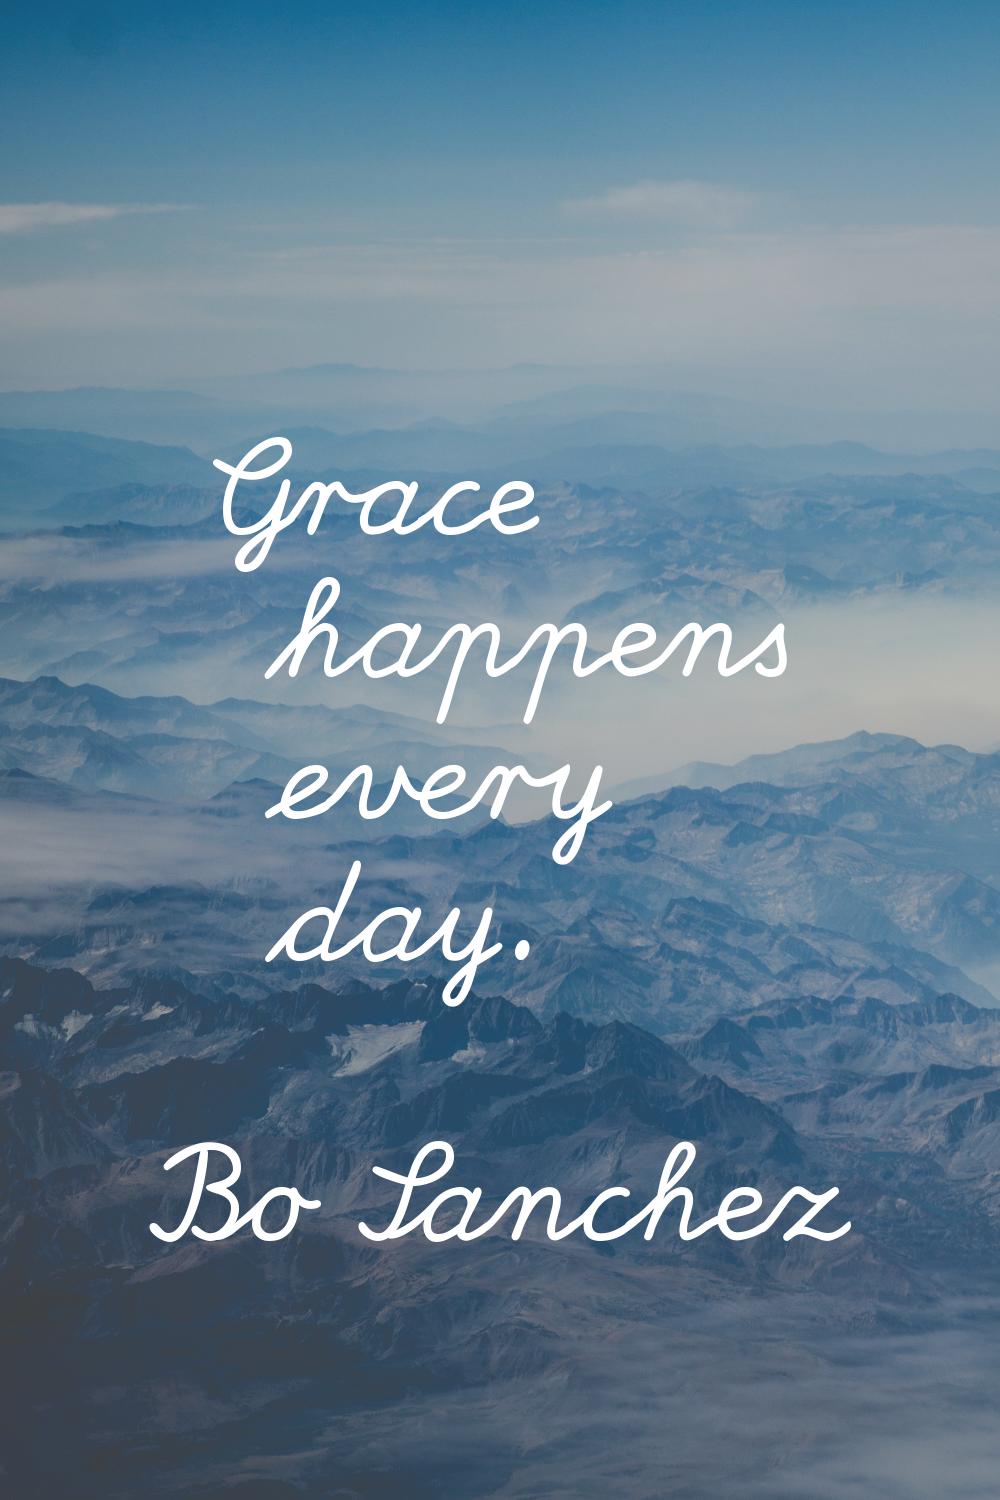 Grace happens every day.